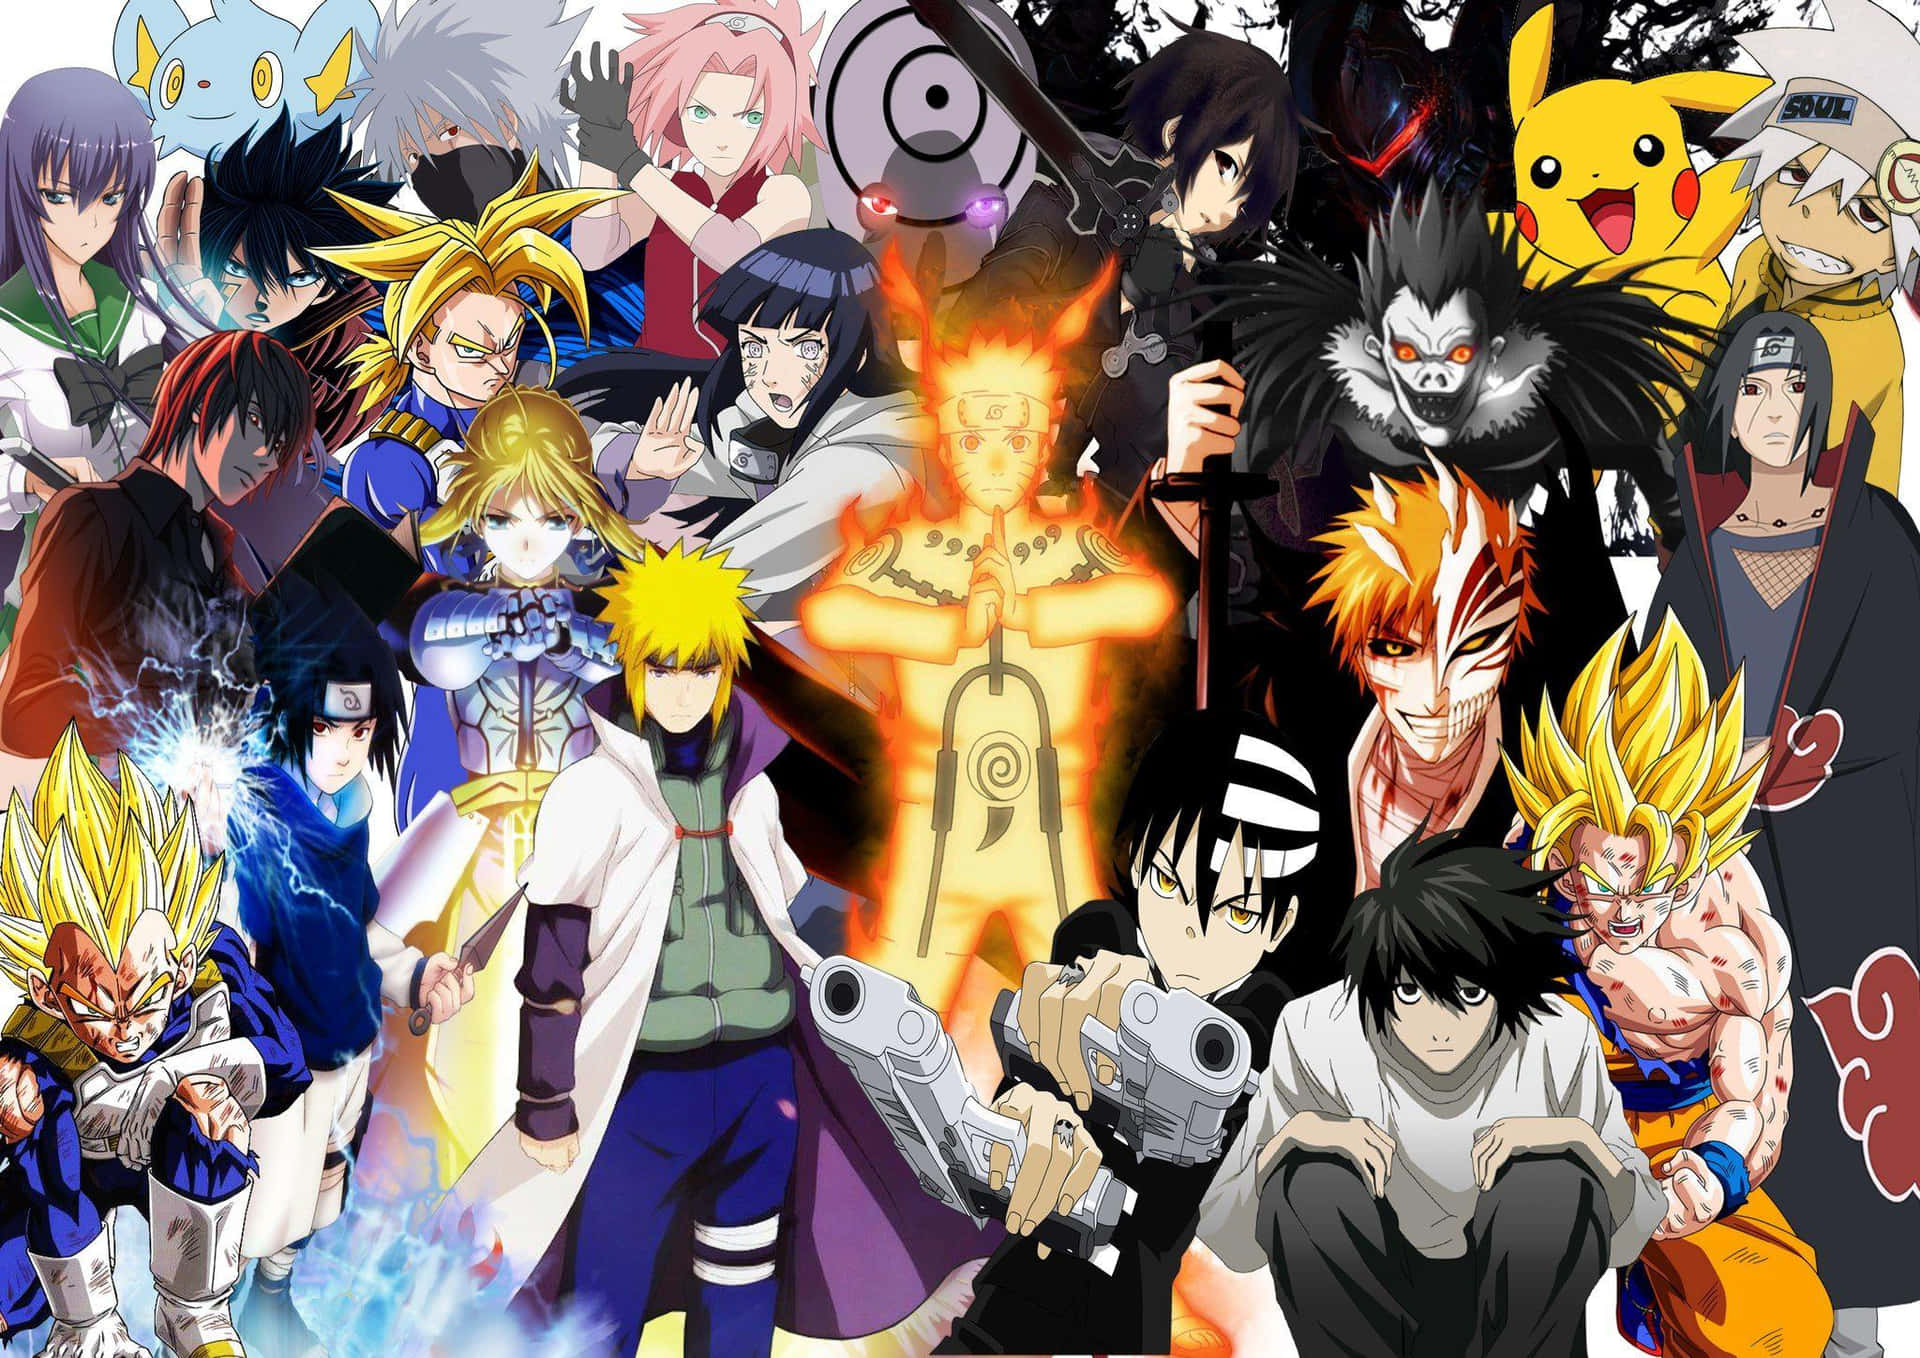 Download Anime Collage 2048 X 1448 Wallpaper Wallpaper | Wallpapers.com